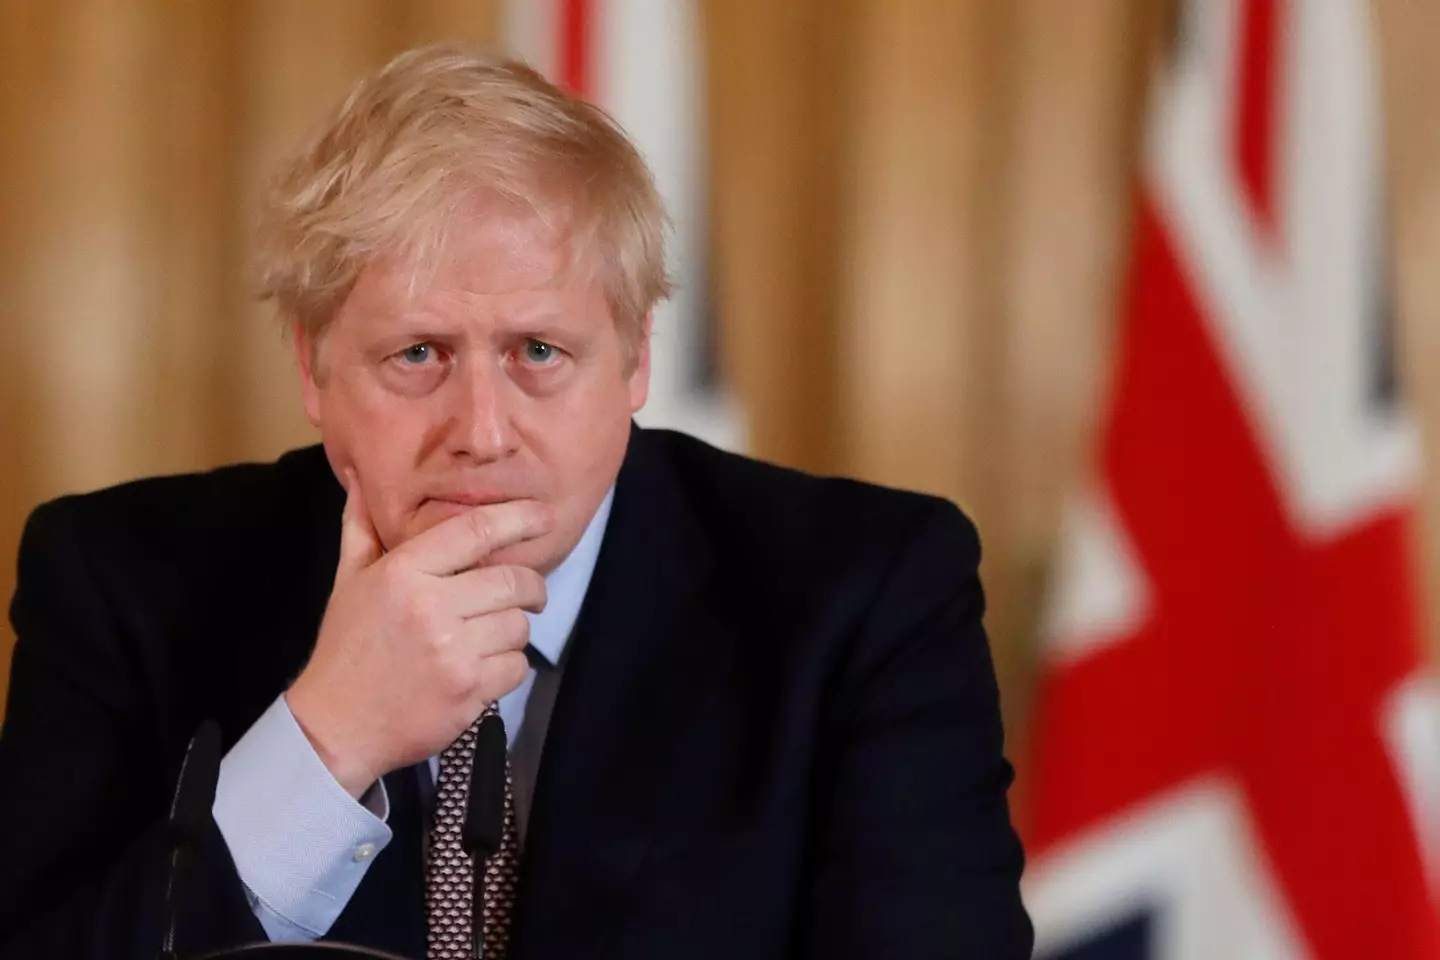 Boris Johnson has resigned from his role as British Prime Minister.